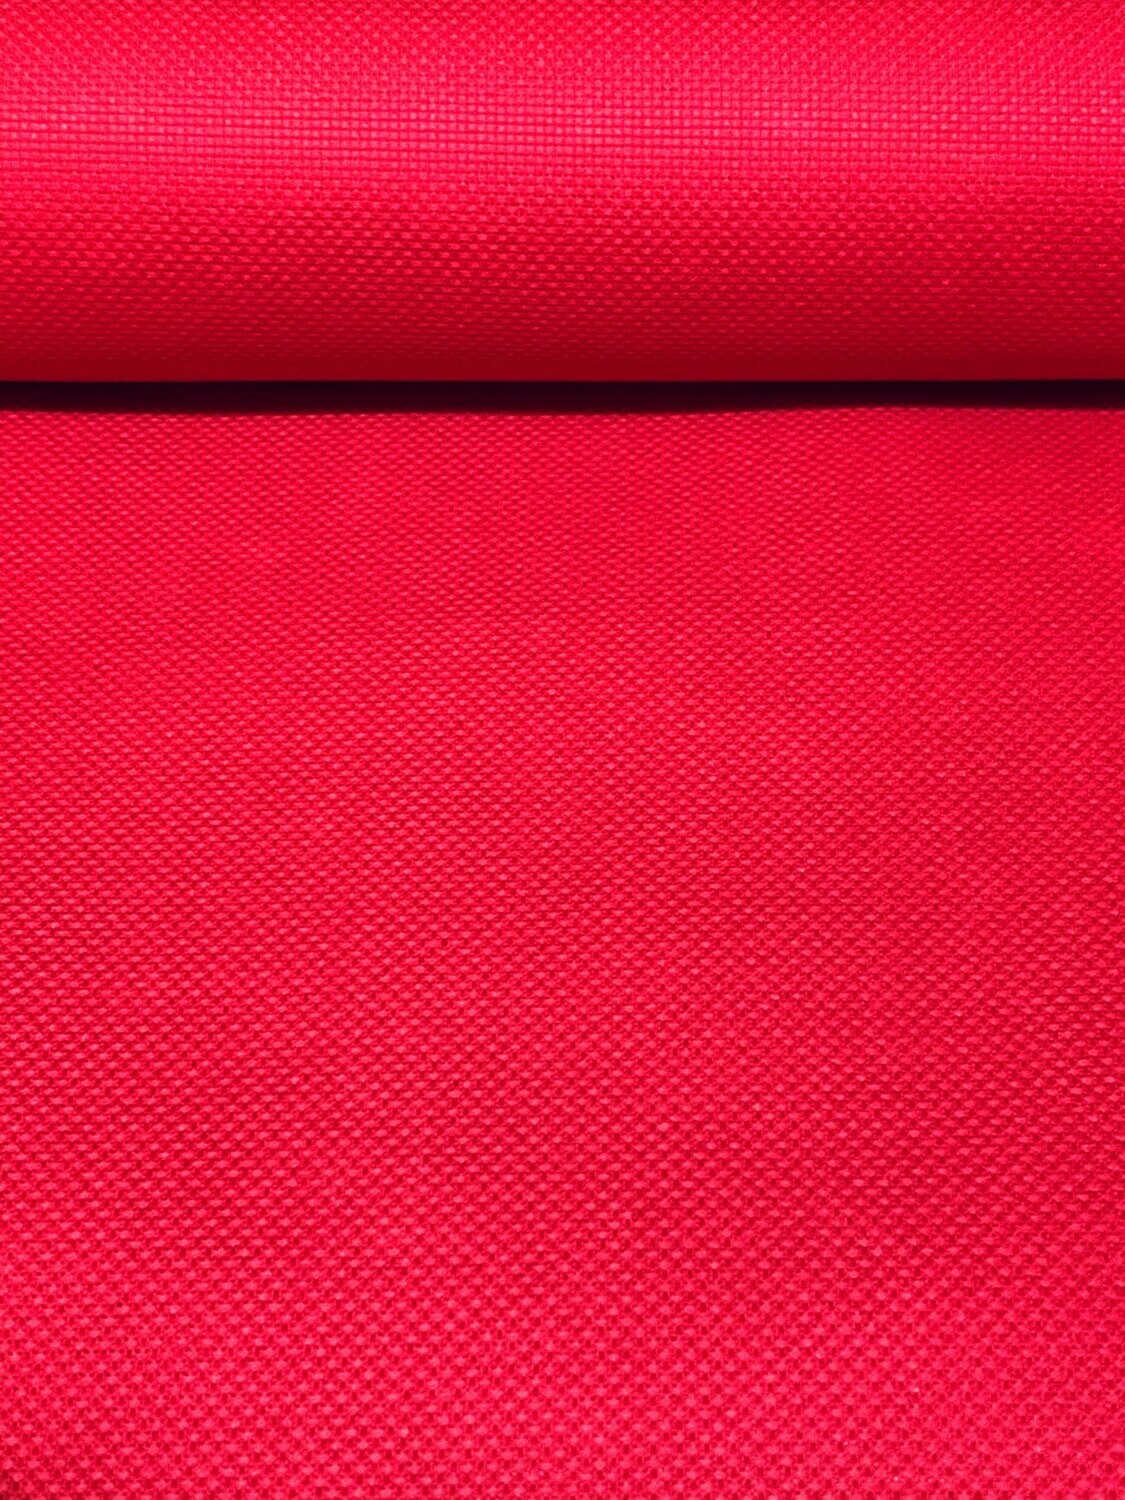 14ct Aida, Red | 150cm wide